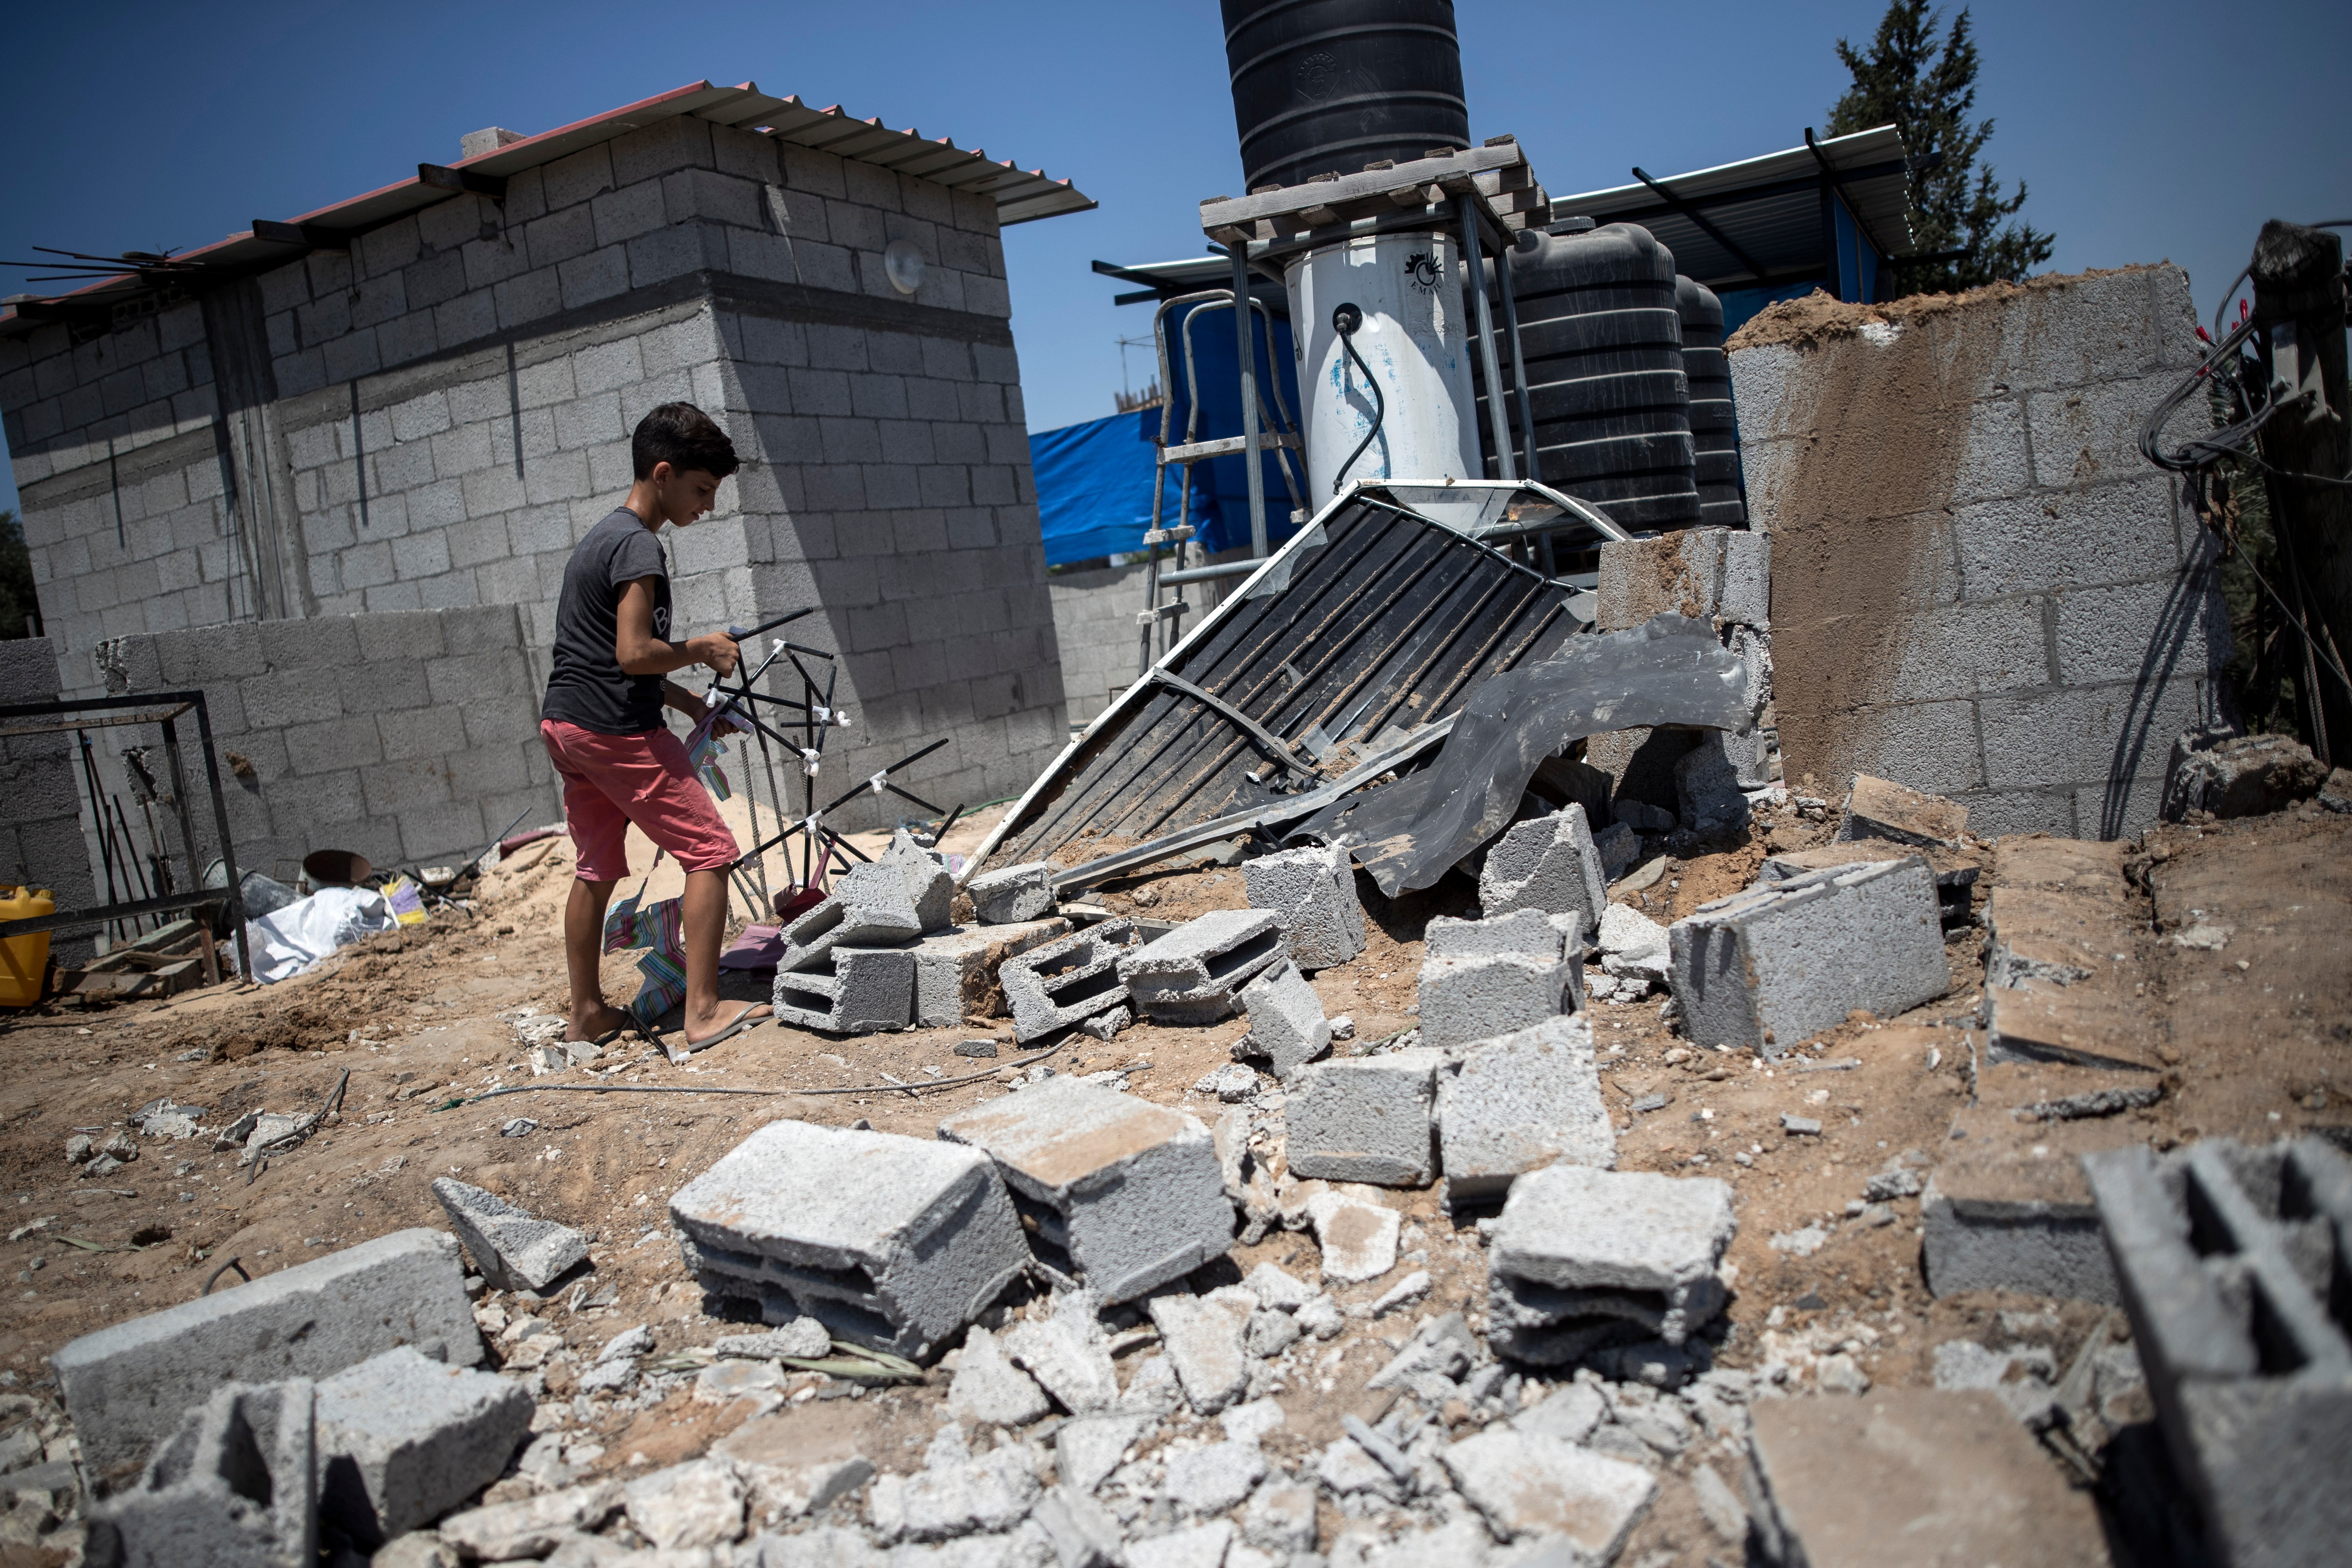 A Palestinian boy inspects the damage in his family home following Israeli airstrikes in Buriej refugee camp, central Gaza Strip.